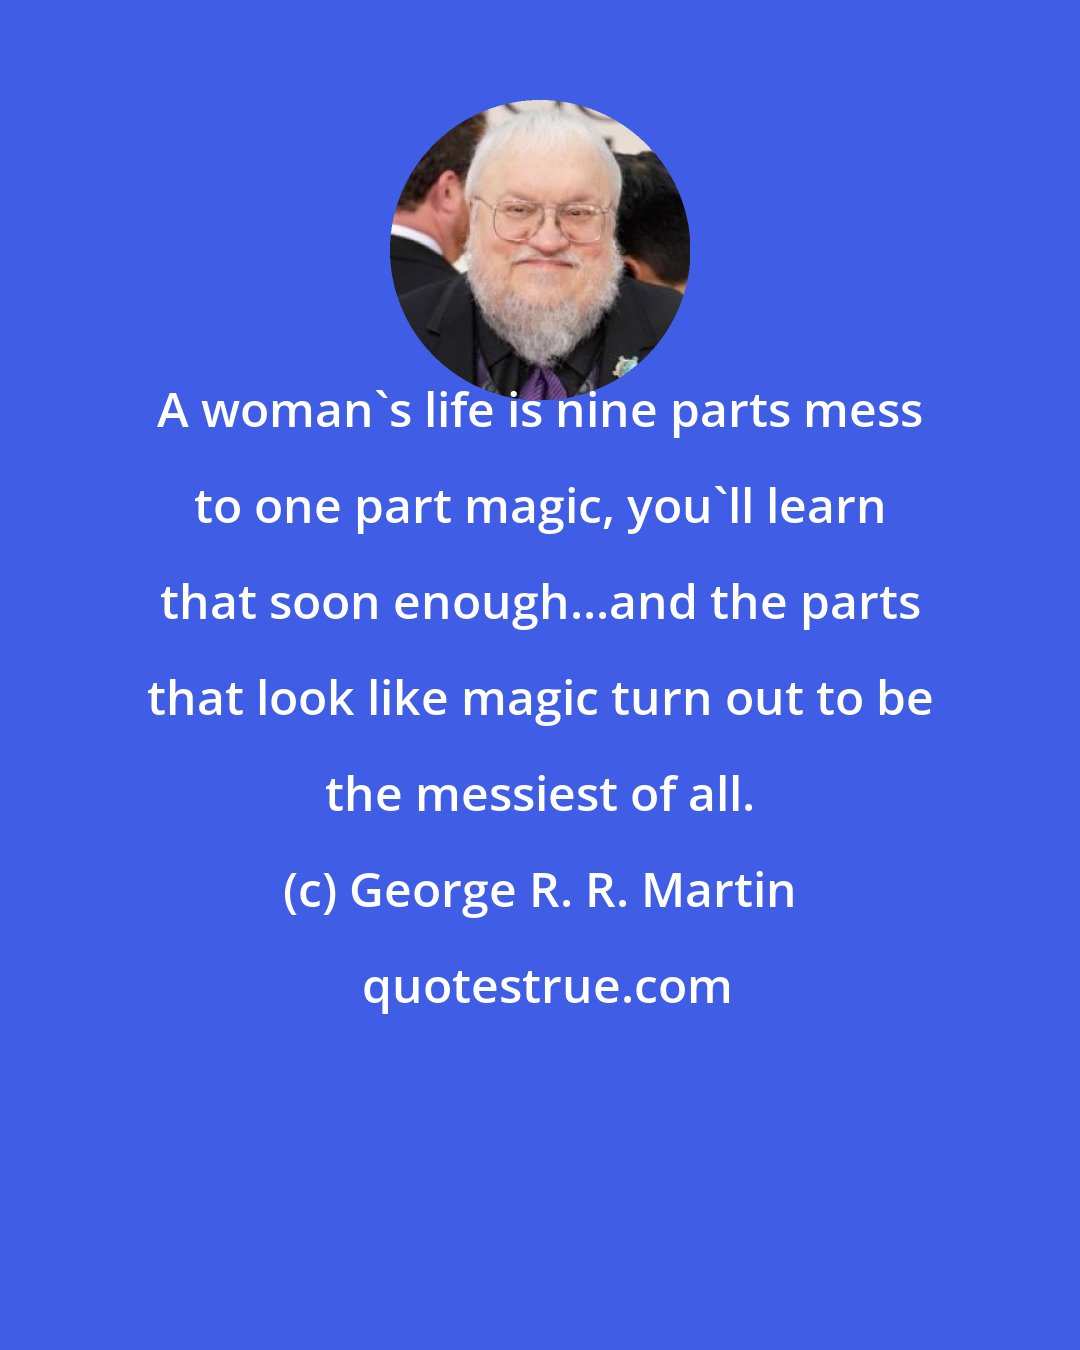 George R. R. Martin: A woman's life is nine parts mess to one part magic, you'll learn that soon enough...and the parts that look like magic turn out to be the messiest of all.